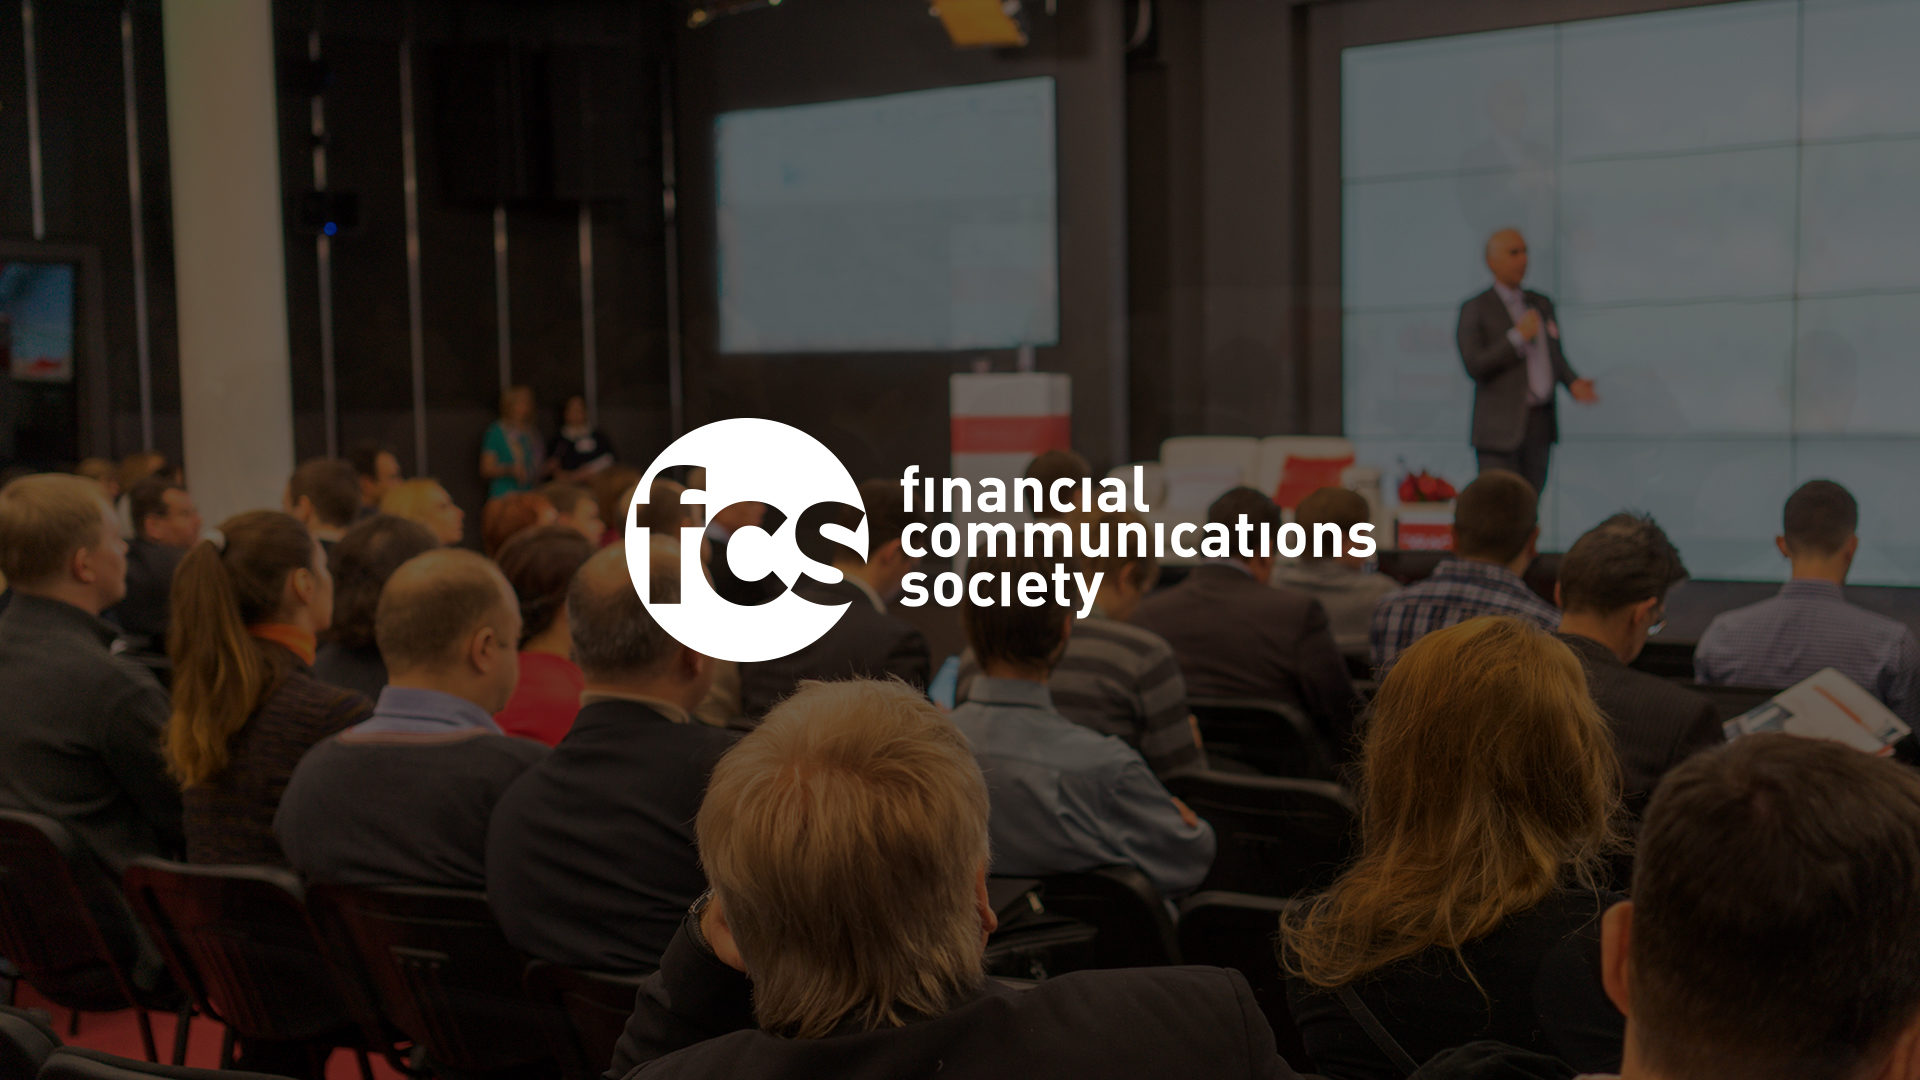 Financial Communications Society Website Design and Development